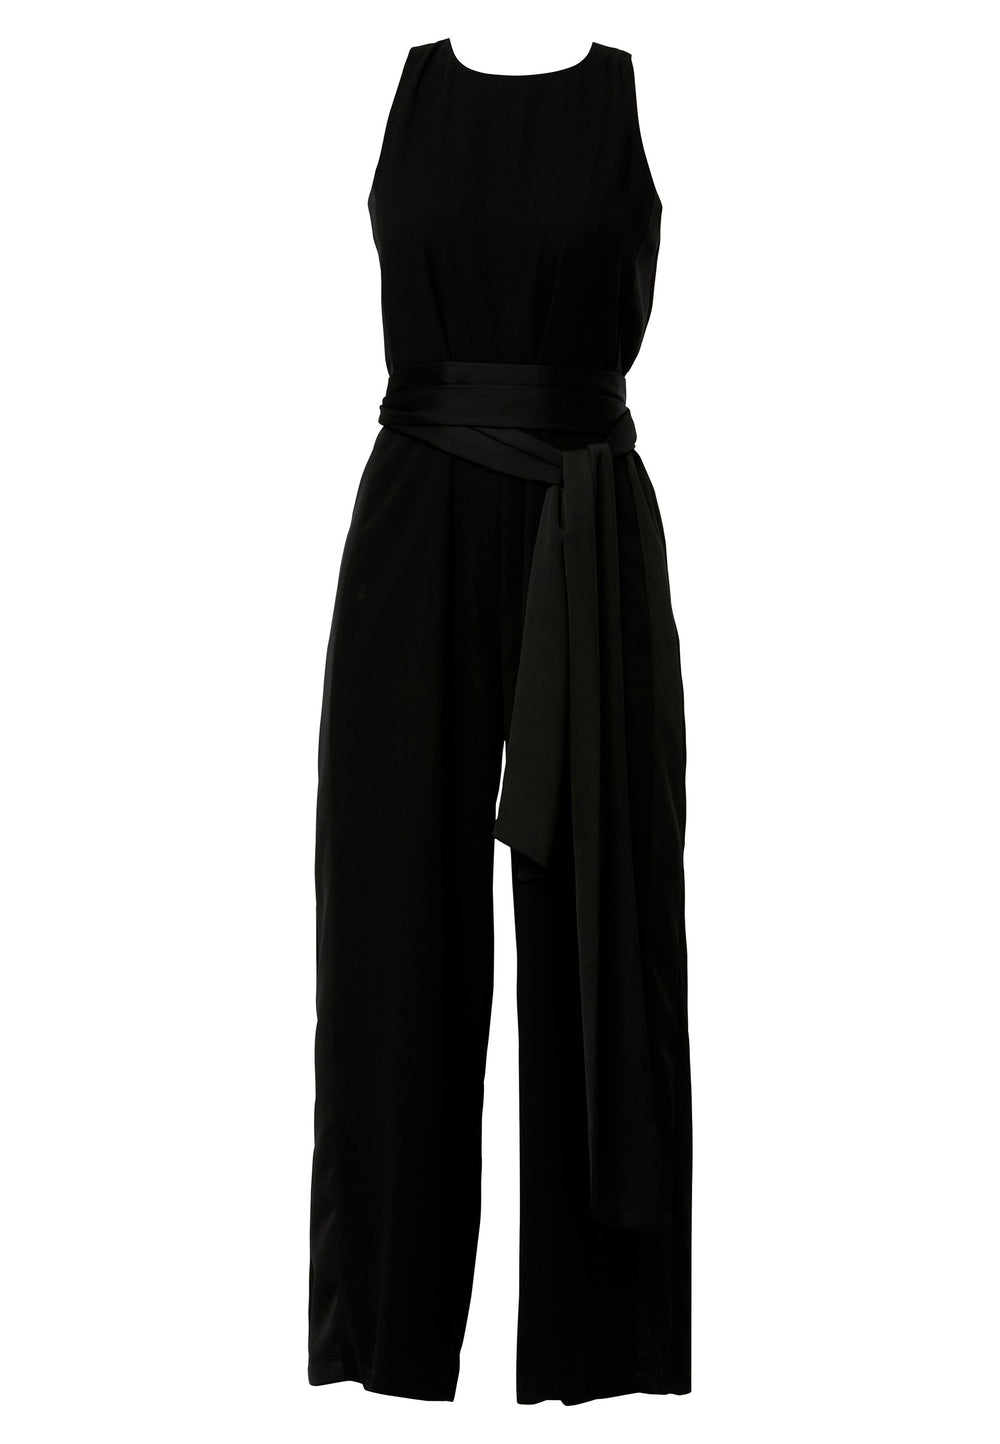 Marie-Claire, a sleeveless black jumpsuit in fluid satin back crepe. Featuring a wide-leg silhouette and satin stripes on the side seams. It comes with a detachable self-fabric belt that can be used to cinch the waist or worn around the neck. Includes practical side pockets for added convenience. Perfect for relaxed yet sophisticated evening dressing.